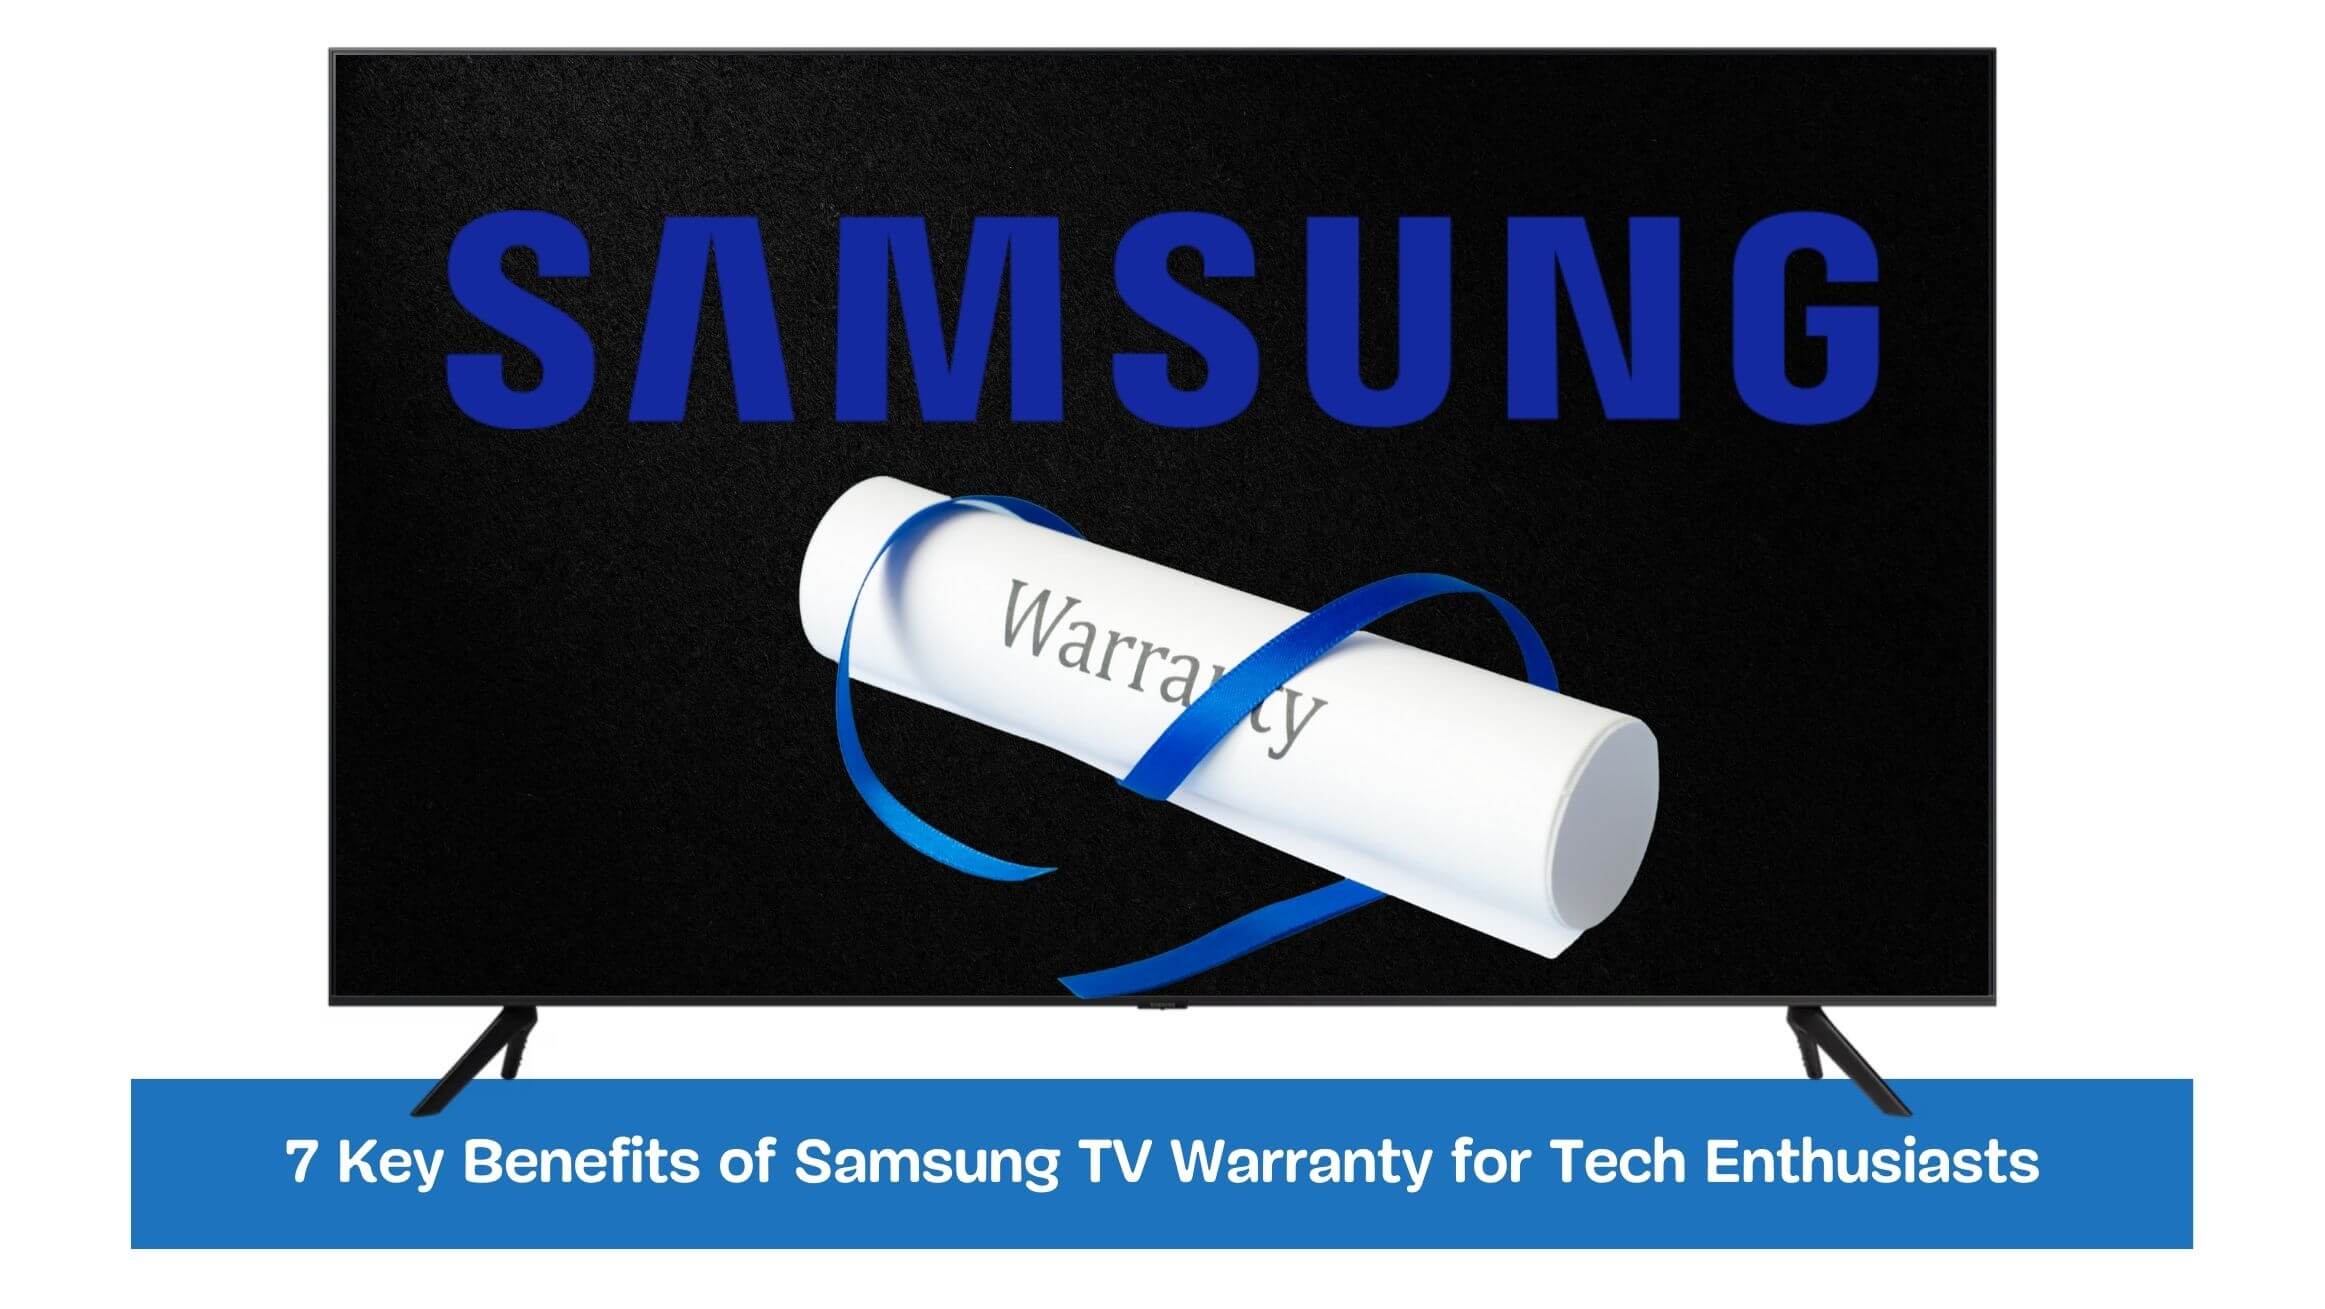 7 Key Benefits of Samsung TV Warranty for Tech Enthusiasts